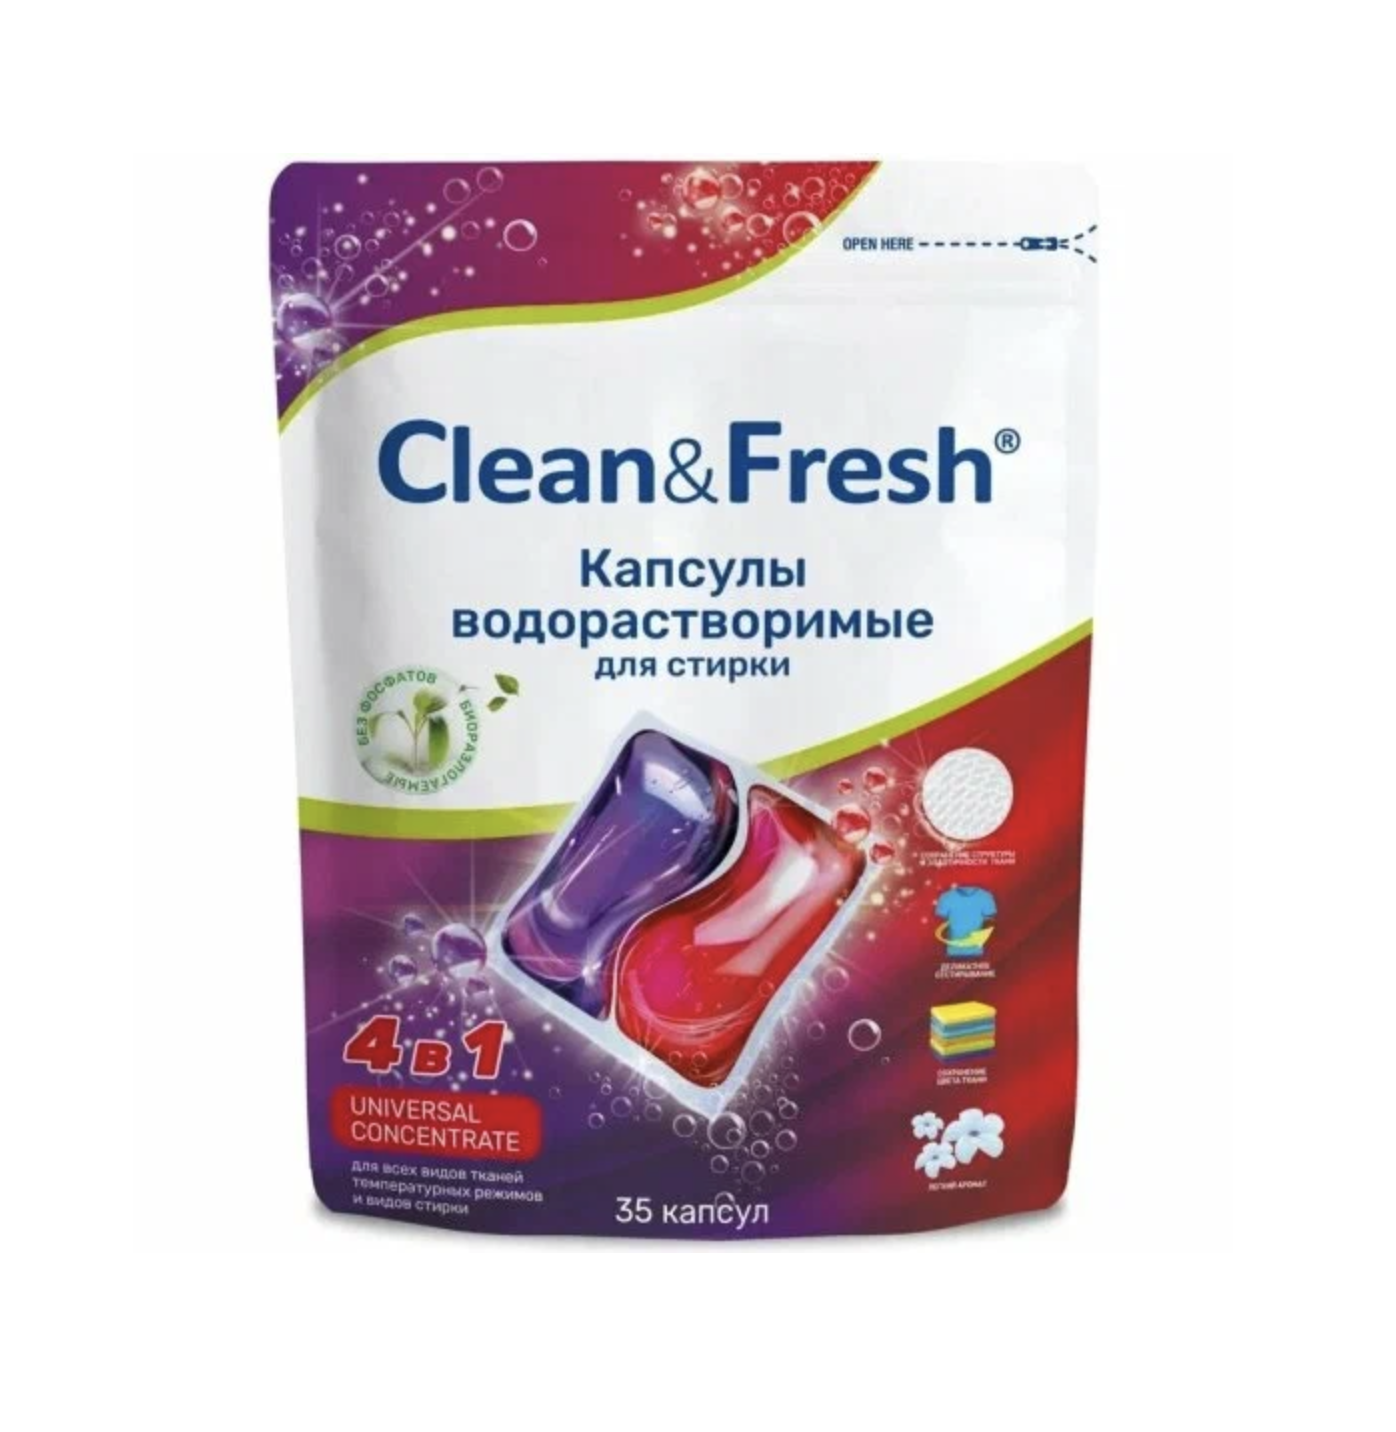     / Clean&Fresh -     41 Universal Concentrate 35 